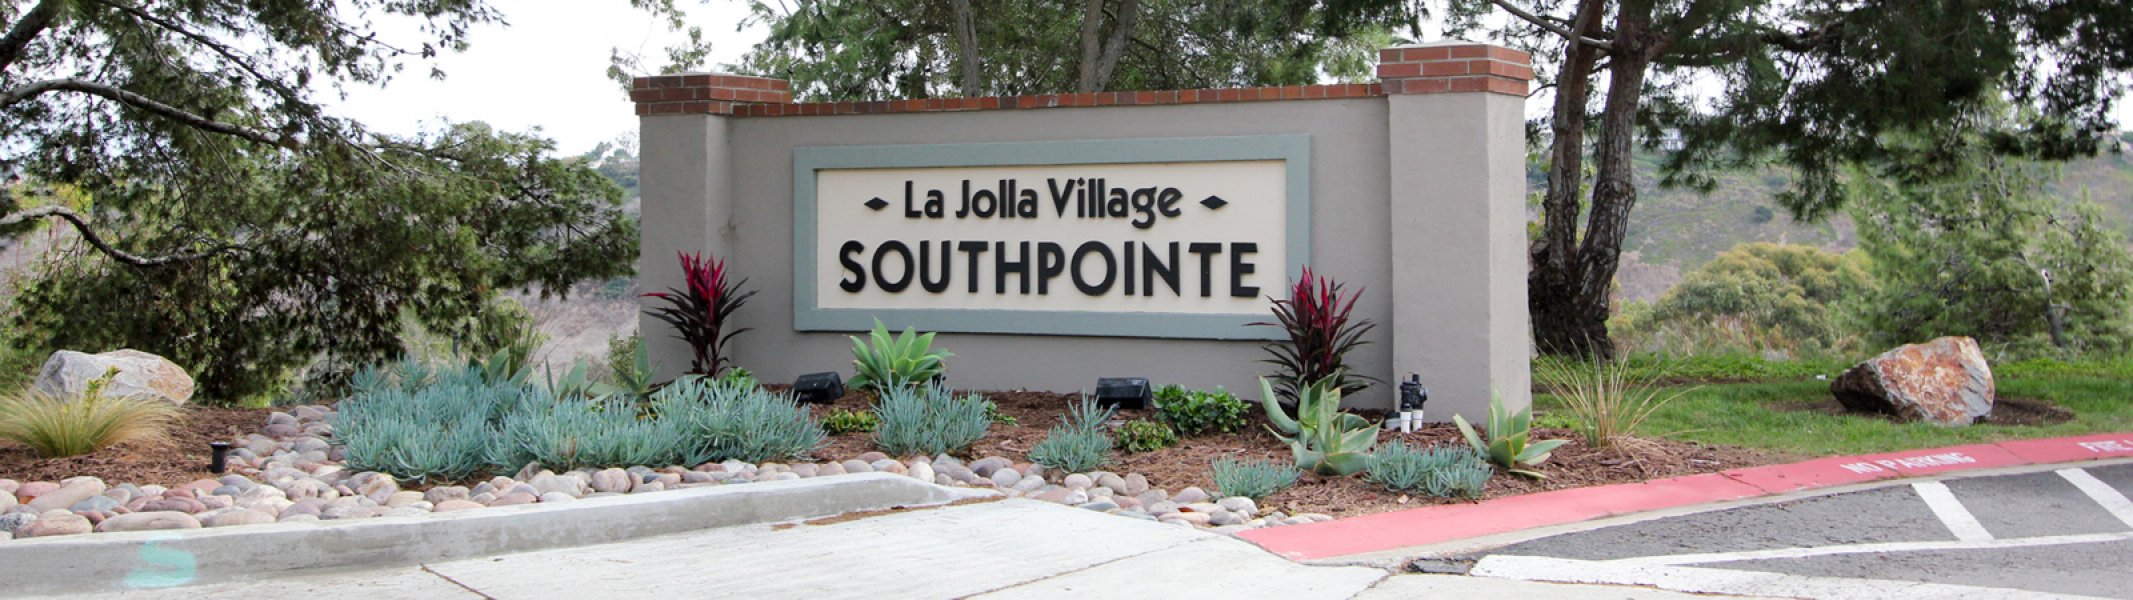 Southpointe